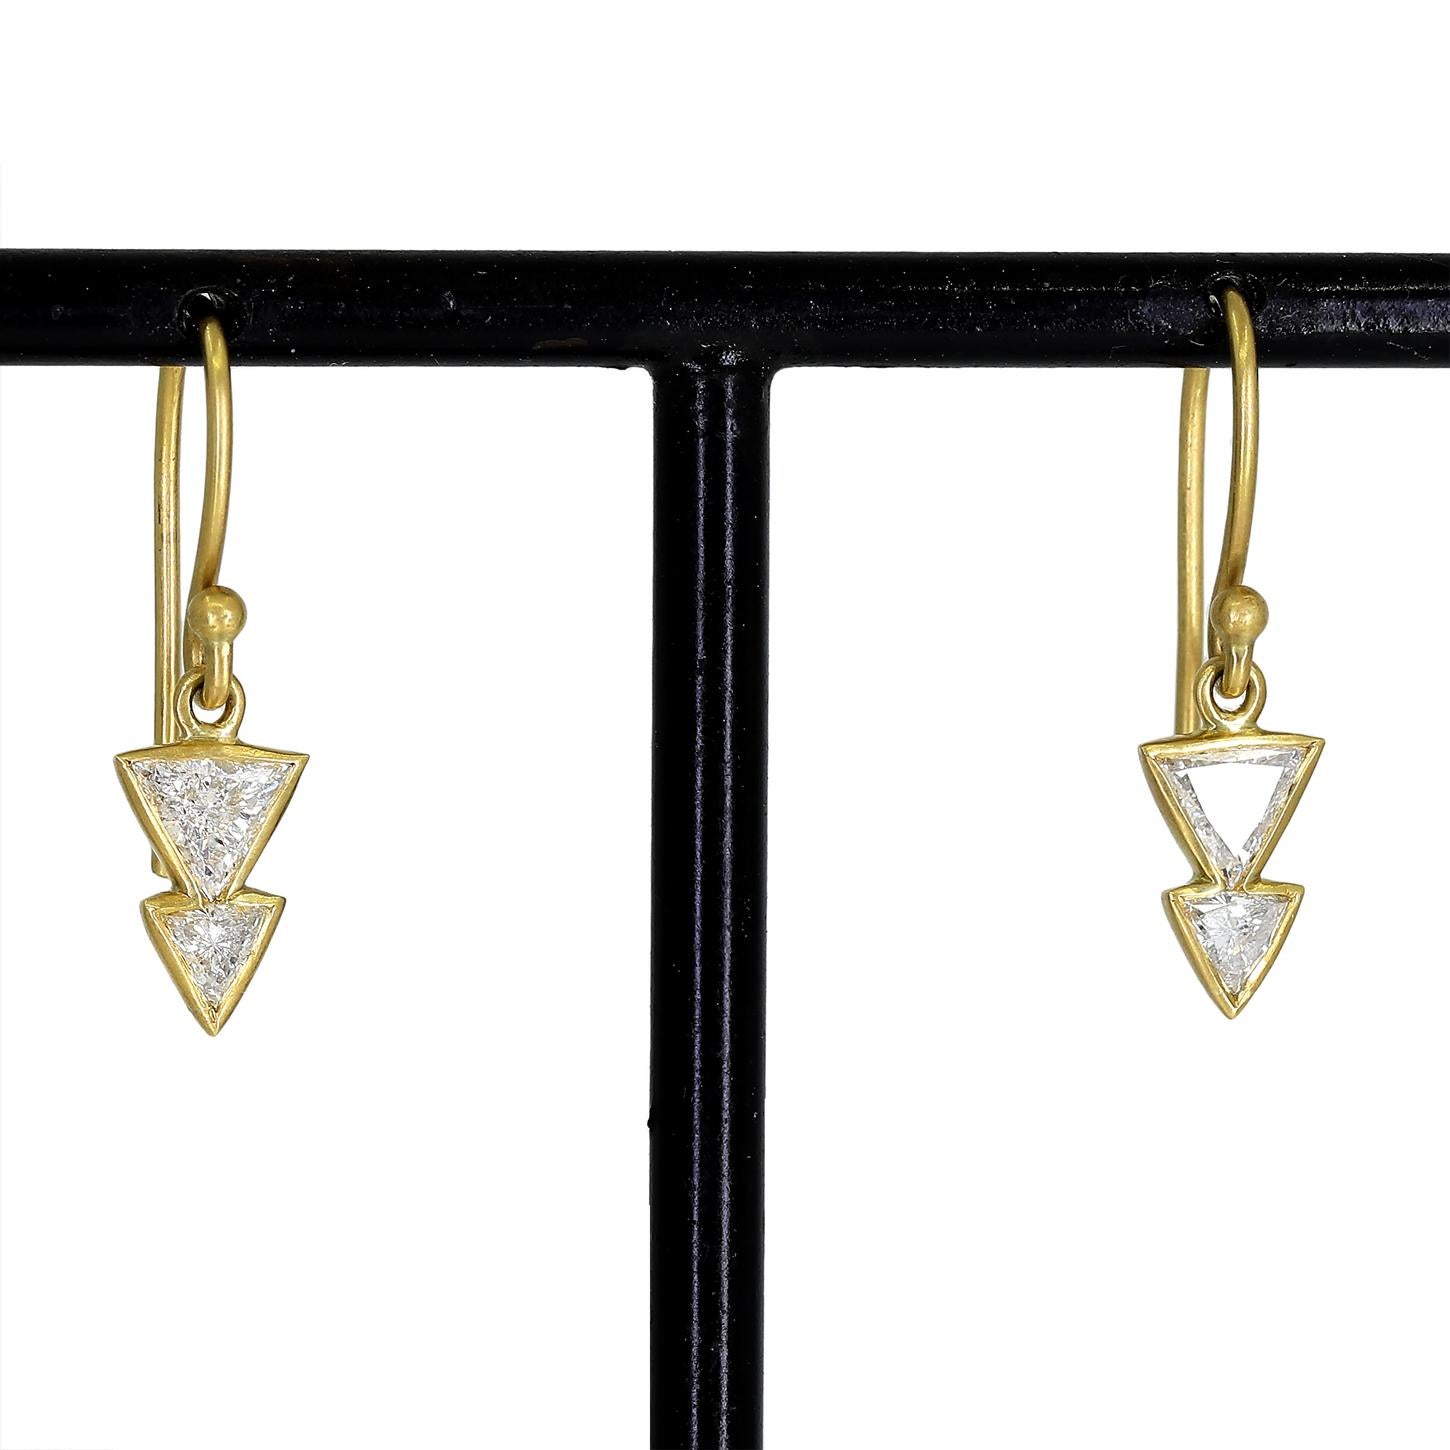 Double dagger drop earrings hand-fabricated by Tej Kothari featuring four shimmering trillion-cut white diamonds totaling 0.46 carats, finished on french ear wires in matte-finished 18k yellow gold.  

About the Designer - Kothari Designs launched